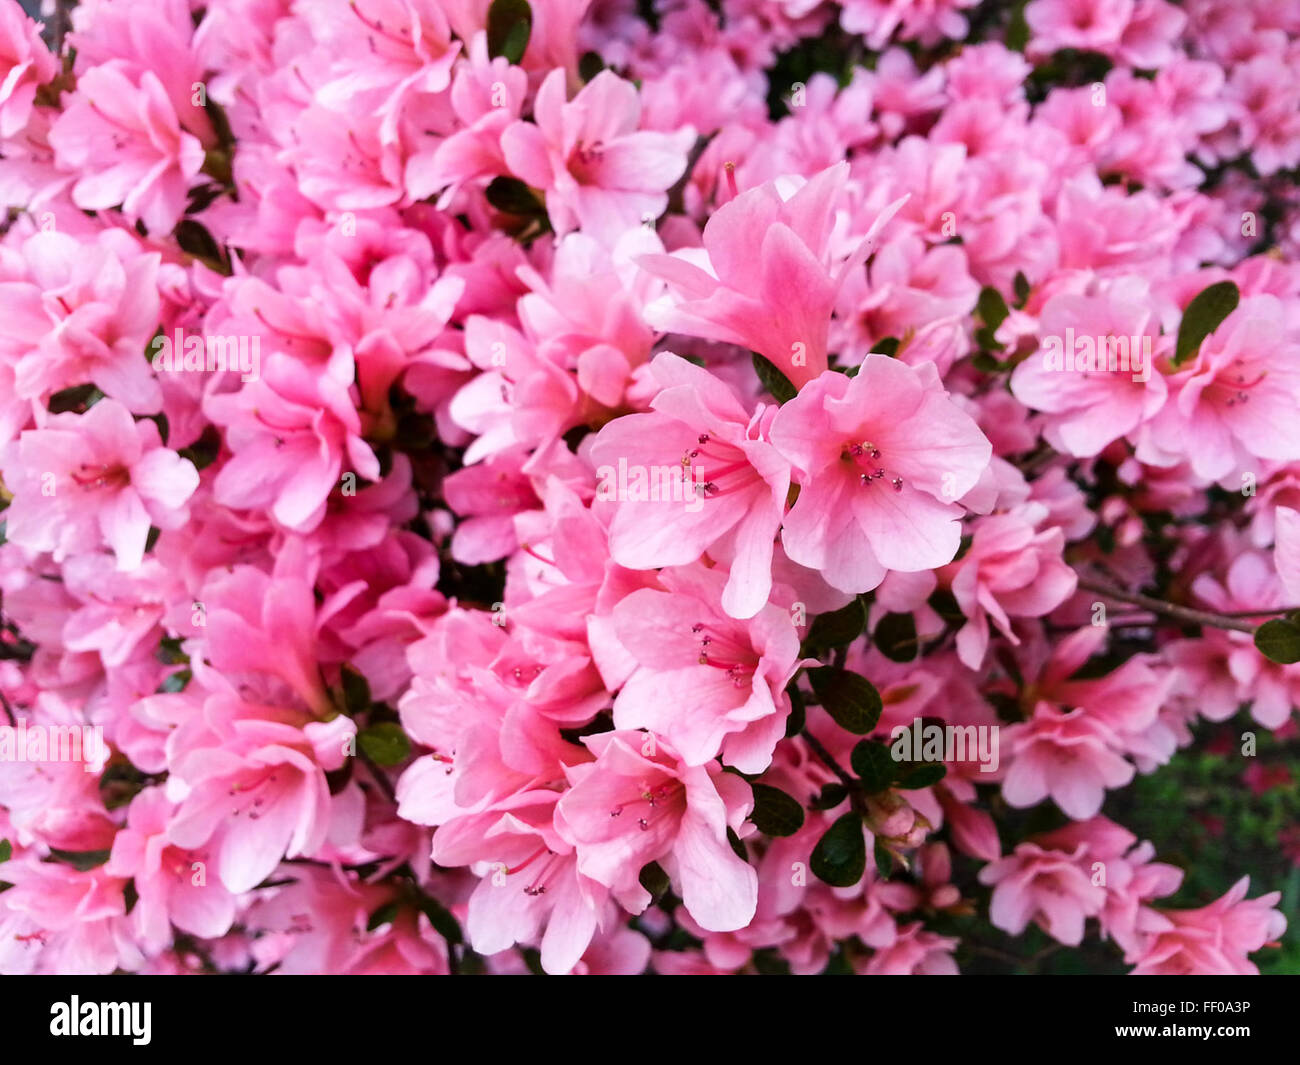 Bunch of Bright Pink Flowers Bunch of Bright Pink Flower Stock Photo